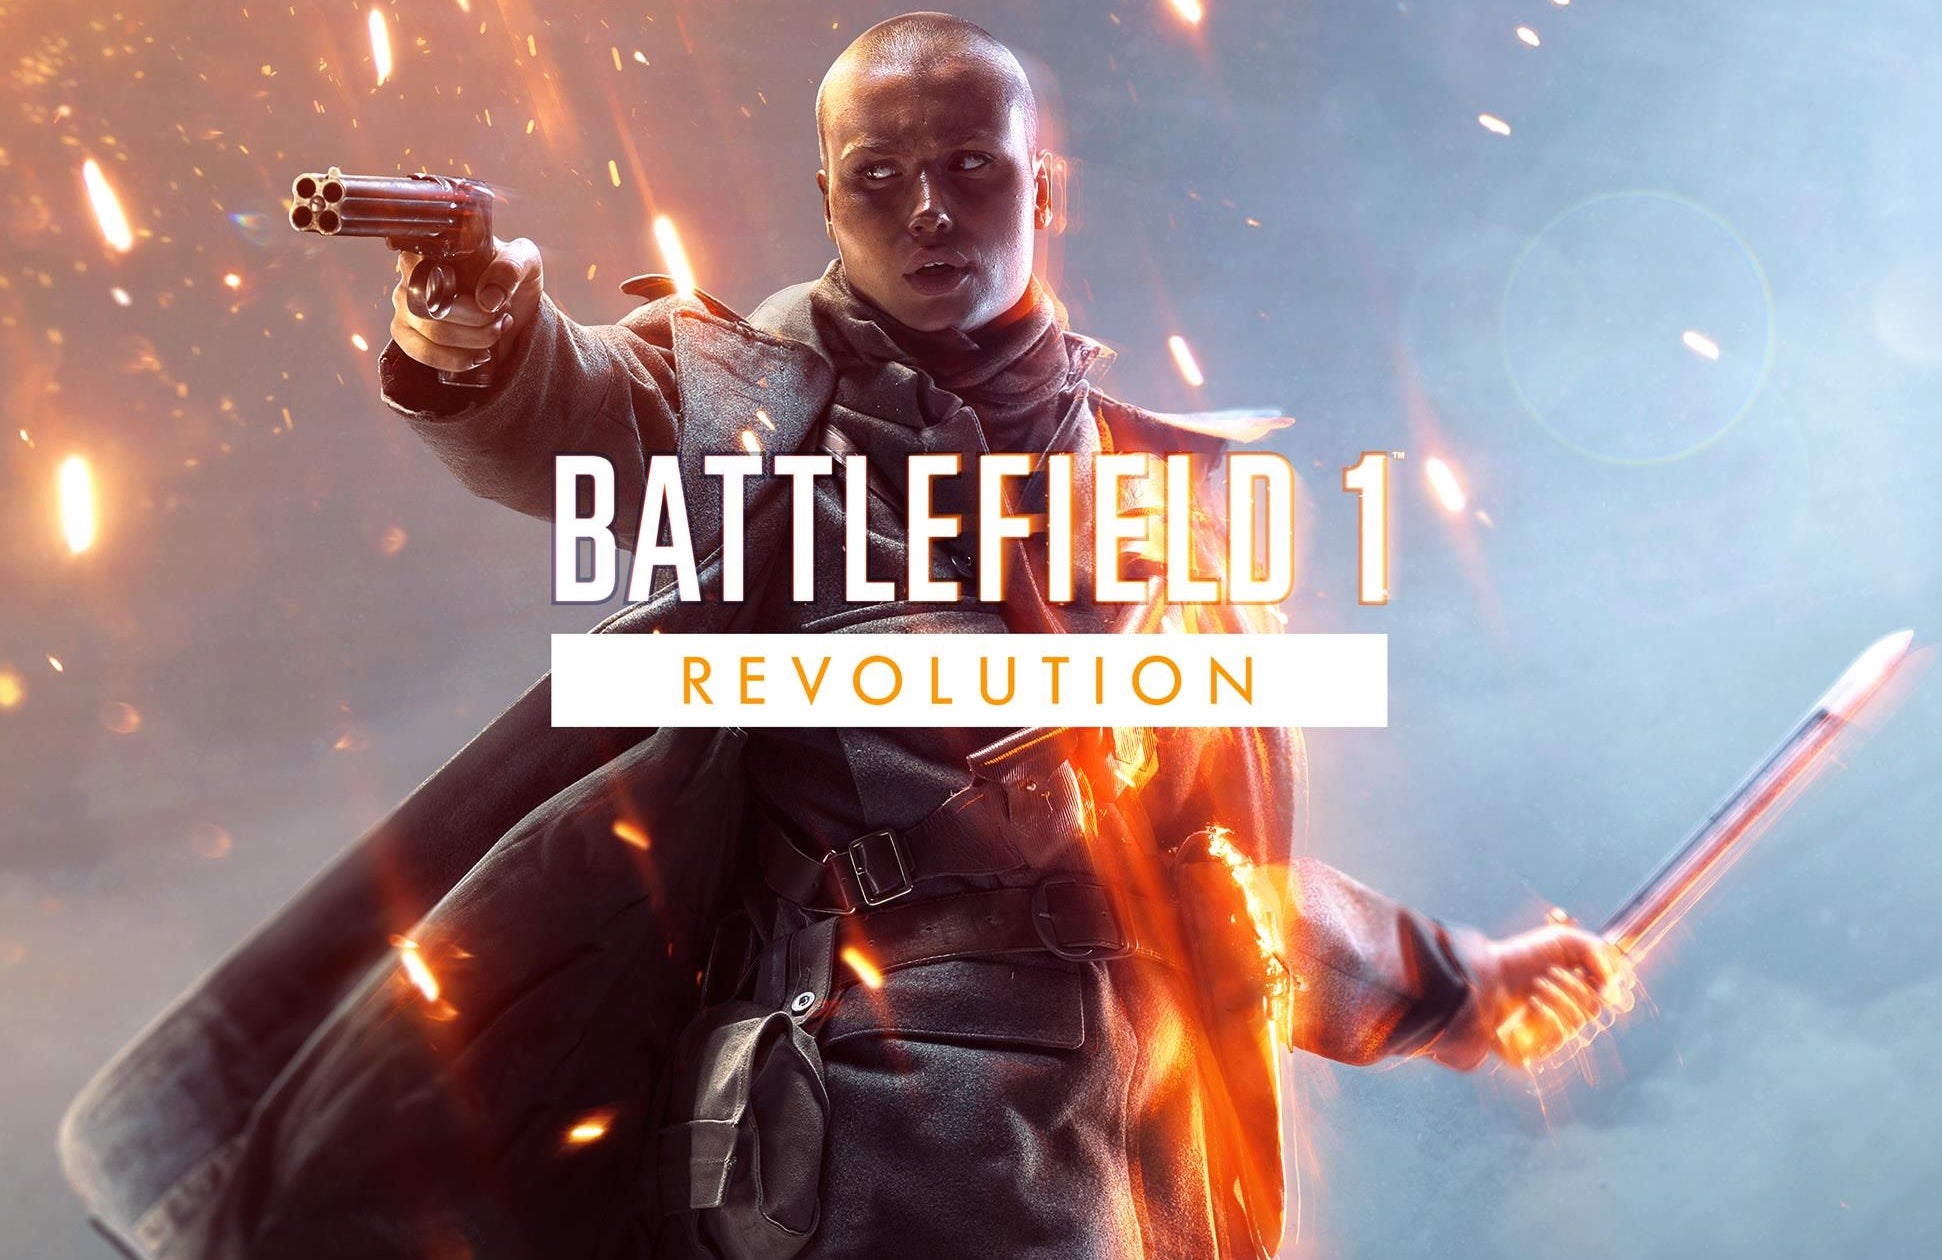 Image for Battlefield 1: Revolution Edition confirmed, includes game and Premium Pass